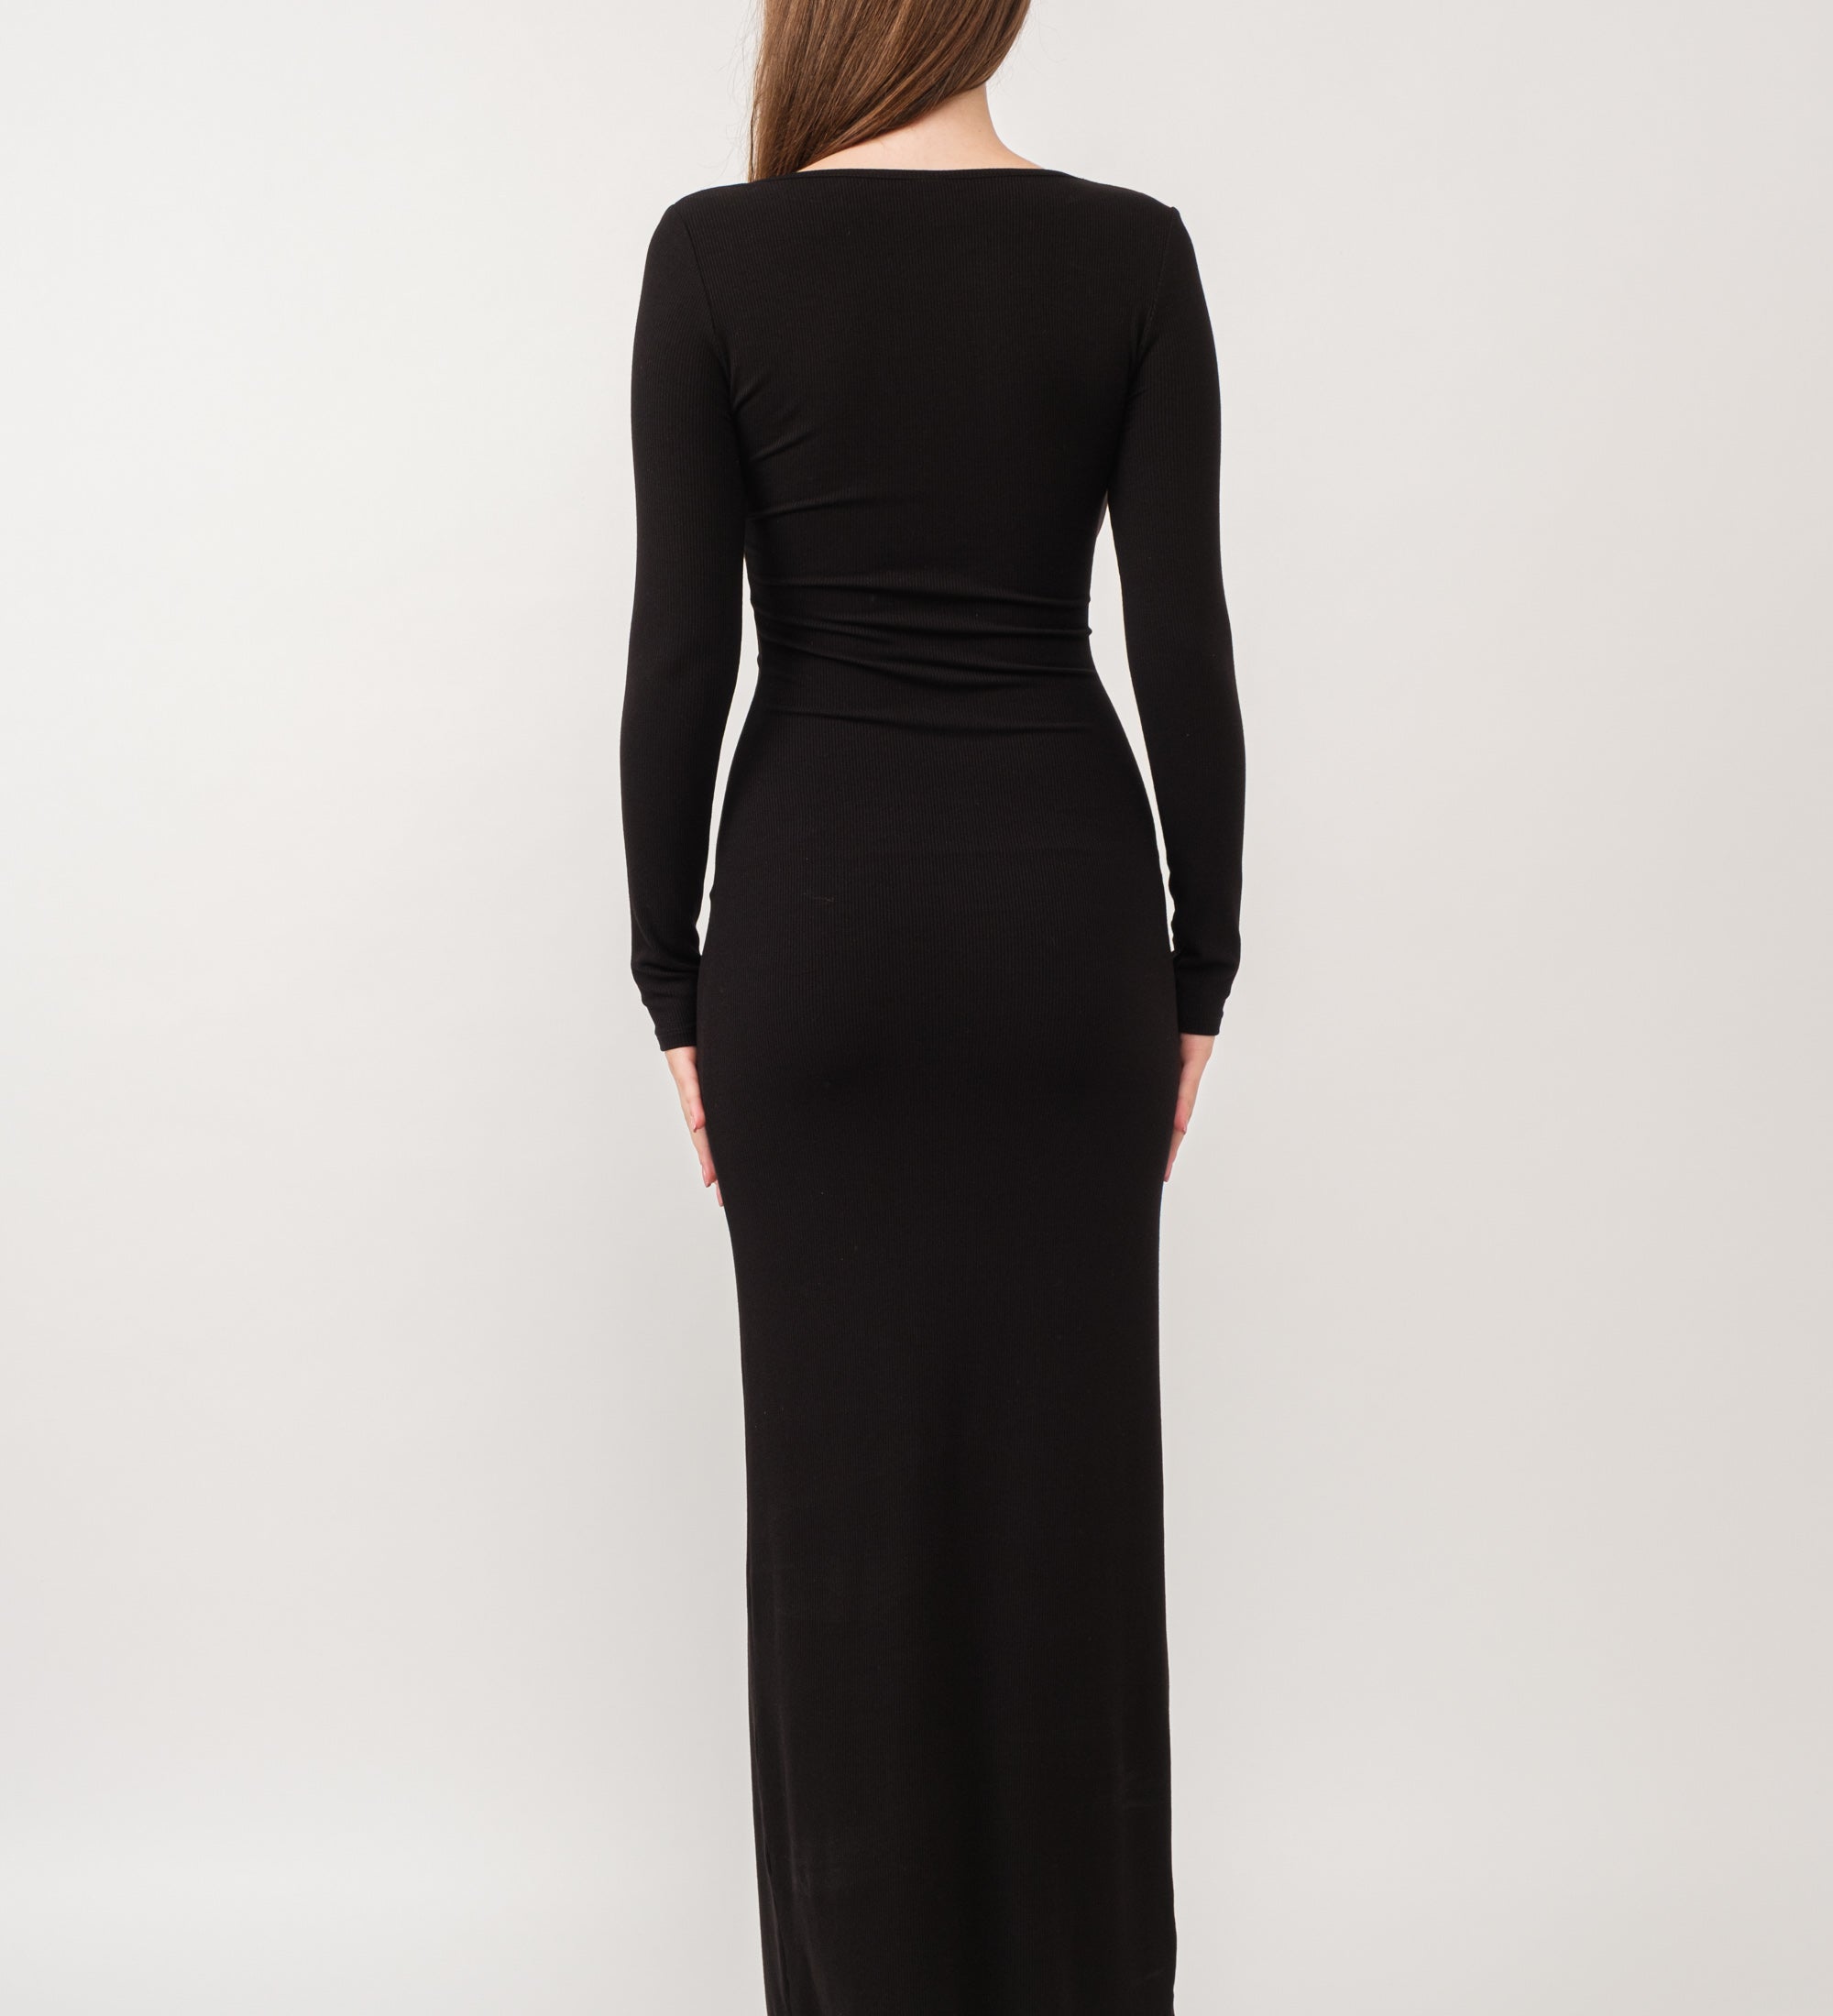 A model wearing a black ribbed maxi dress against a white wall. 